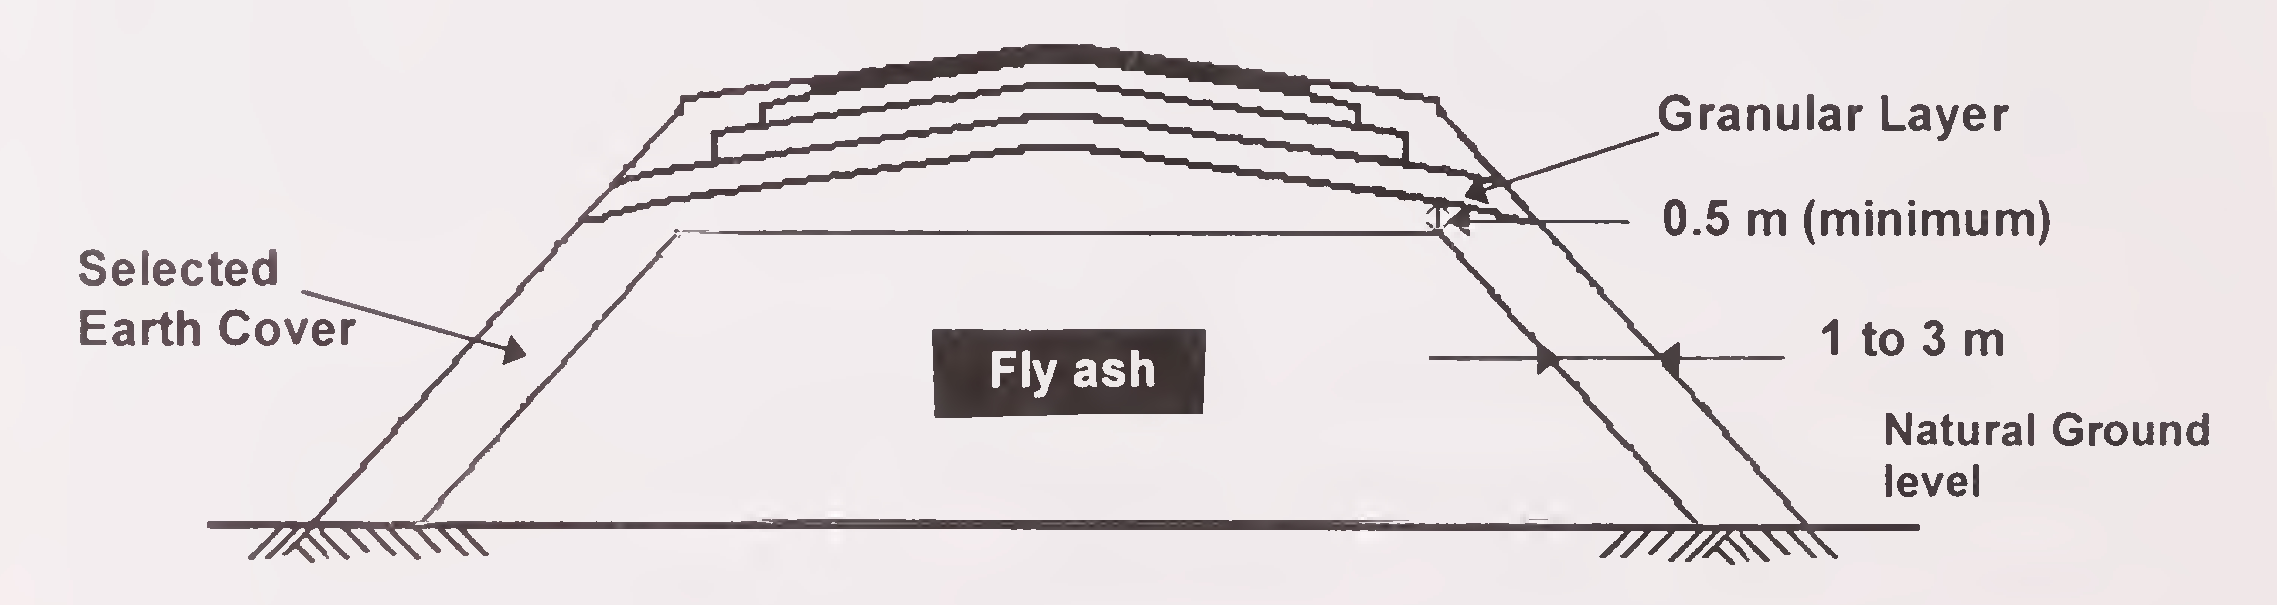 Fig. 2. Typical Cross-Section of Embankment with Core of Fly Ash